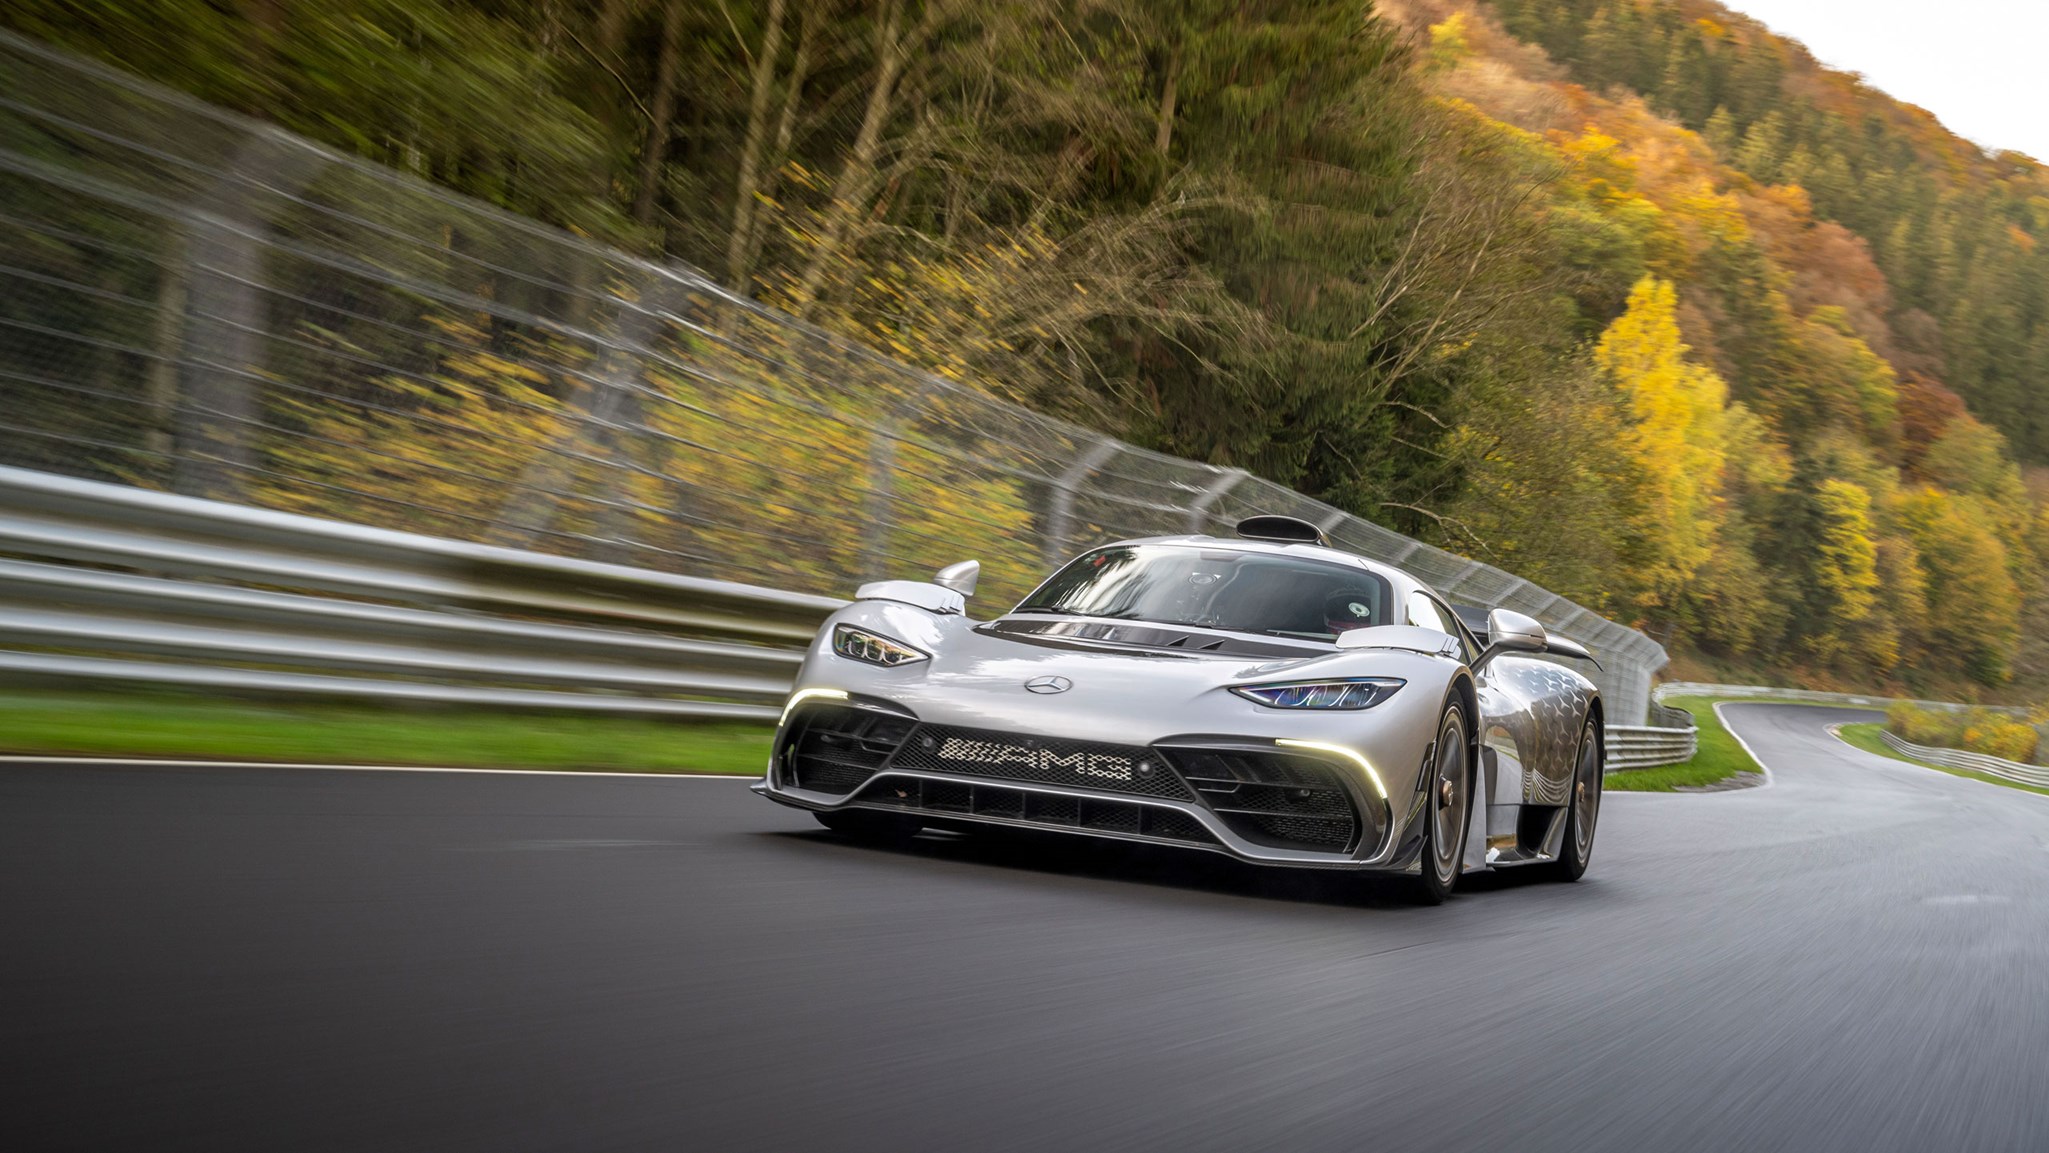 The Mercedes AMG One has smashed the 'Ring lap record